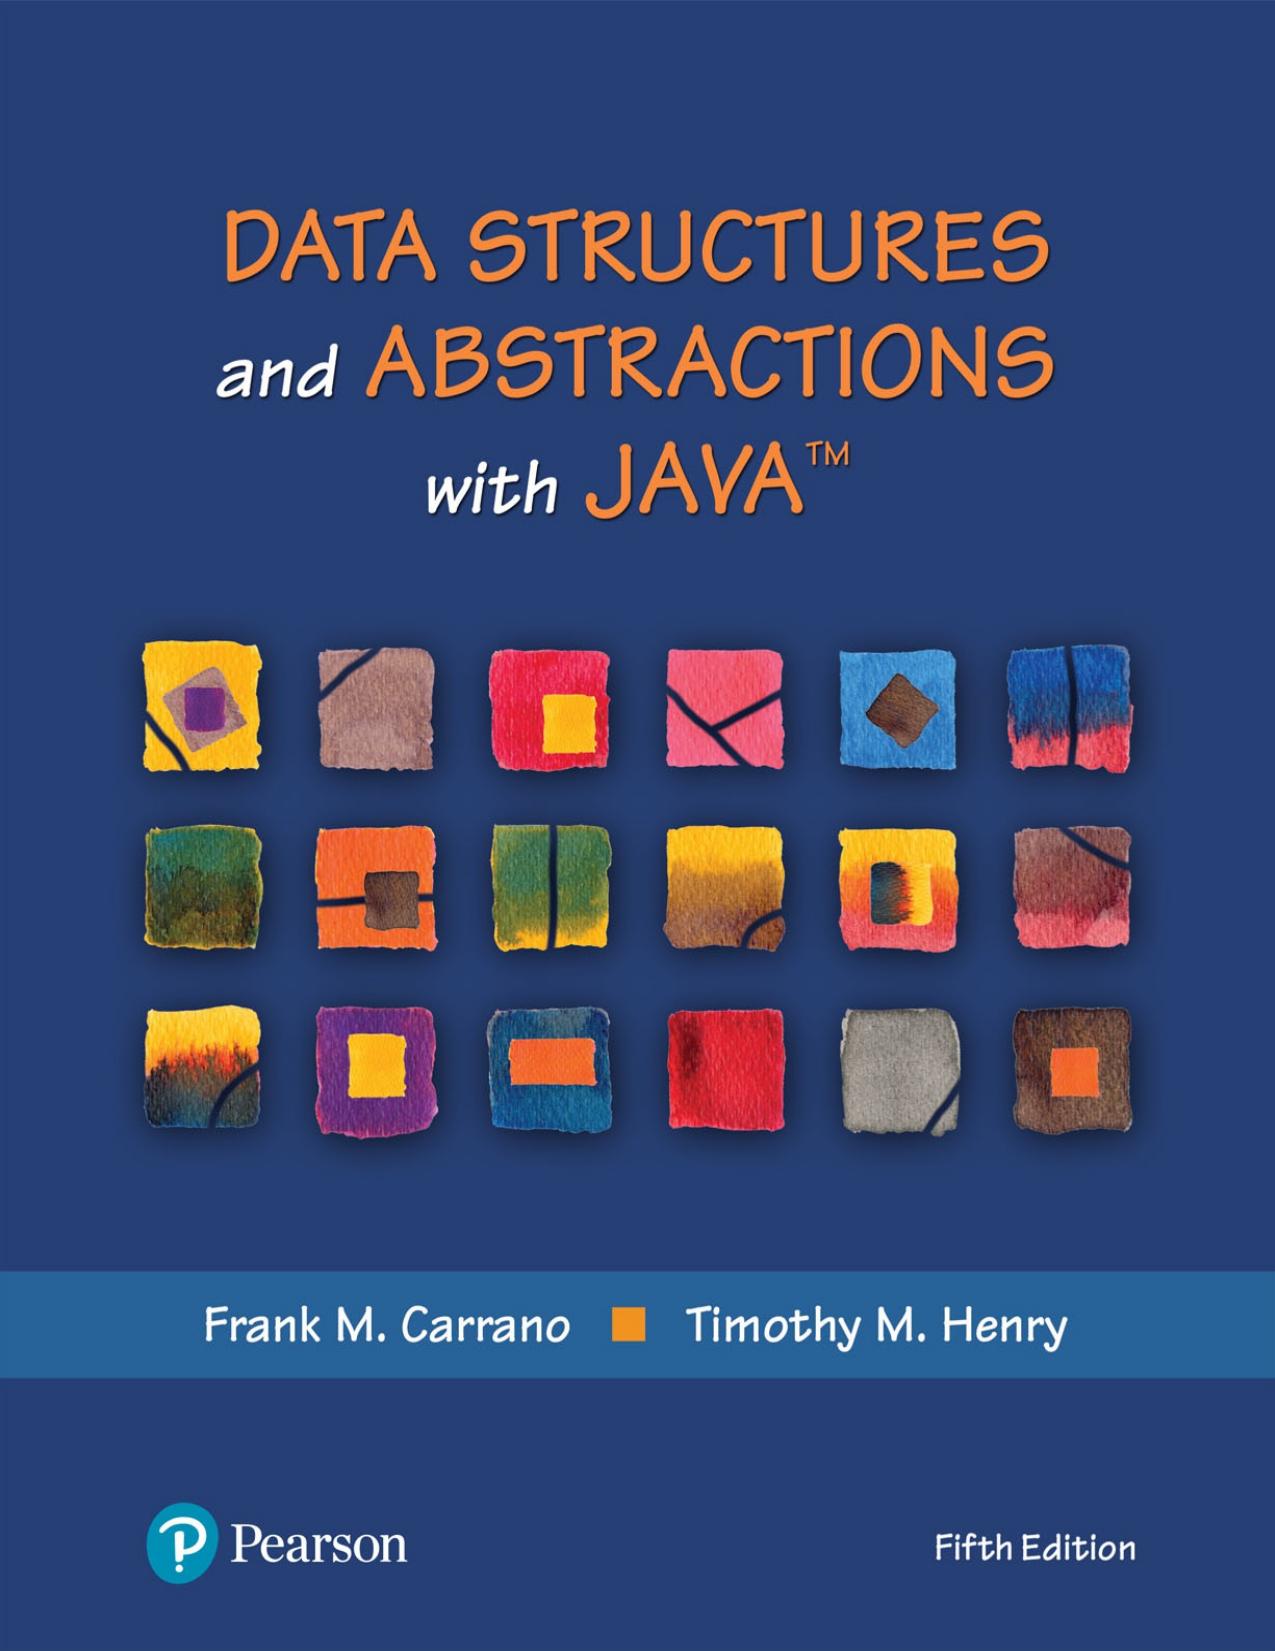 Data Structures and Abstractions with Java 5th - www.vitalsource.com.jpg